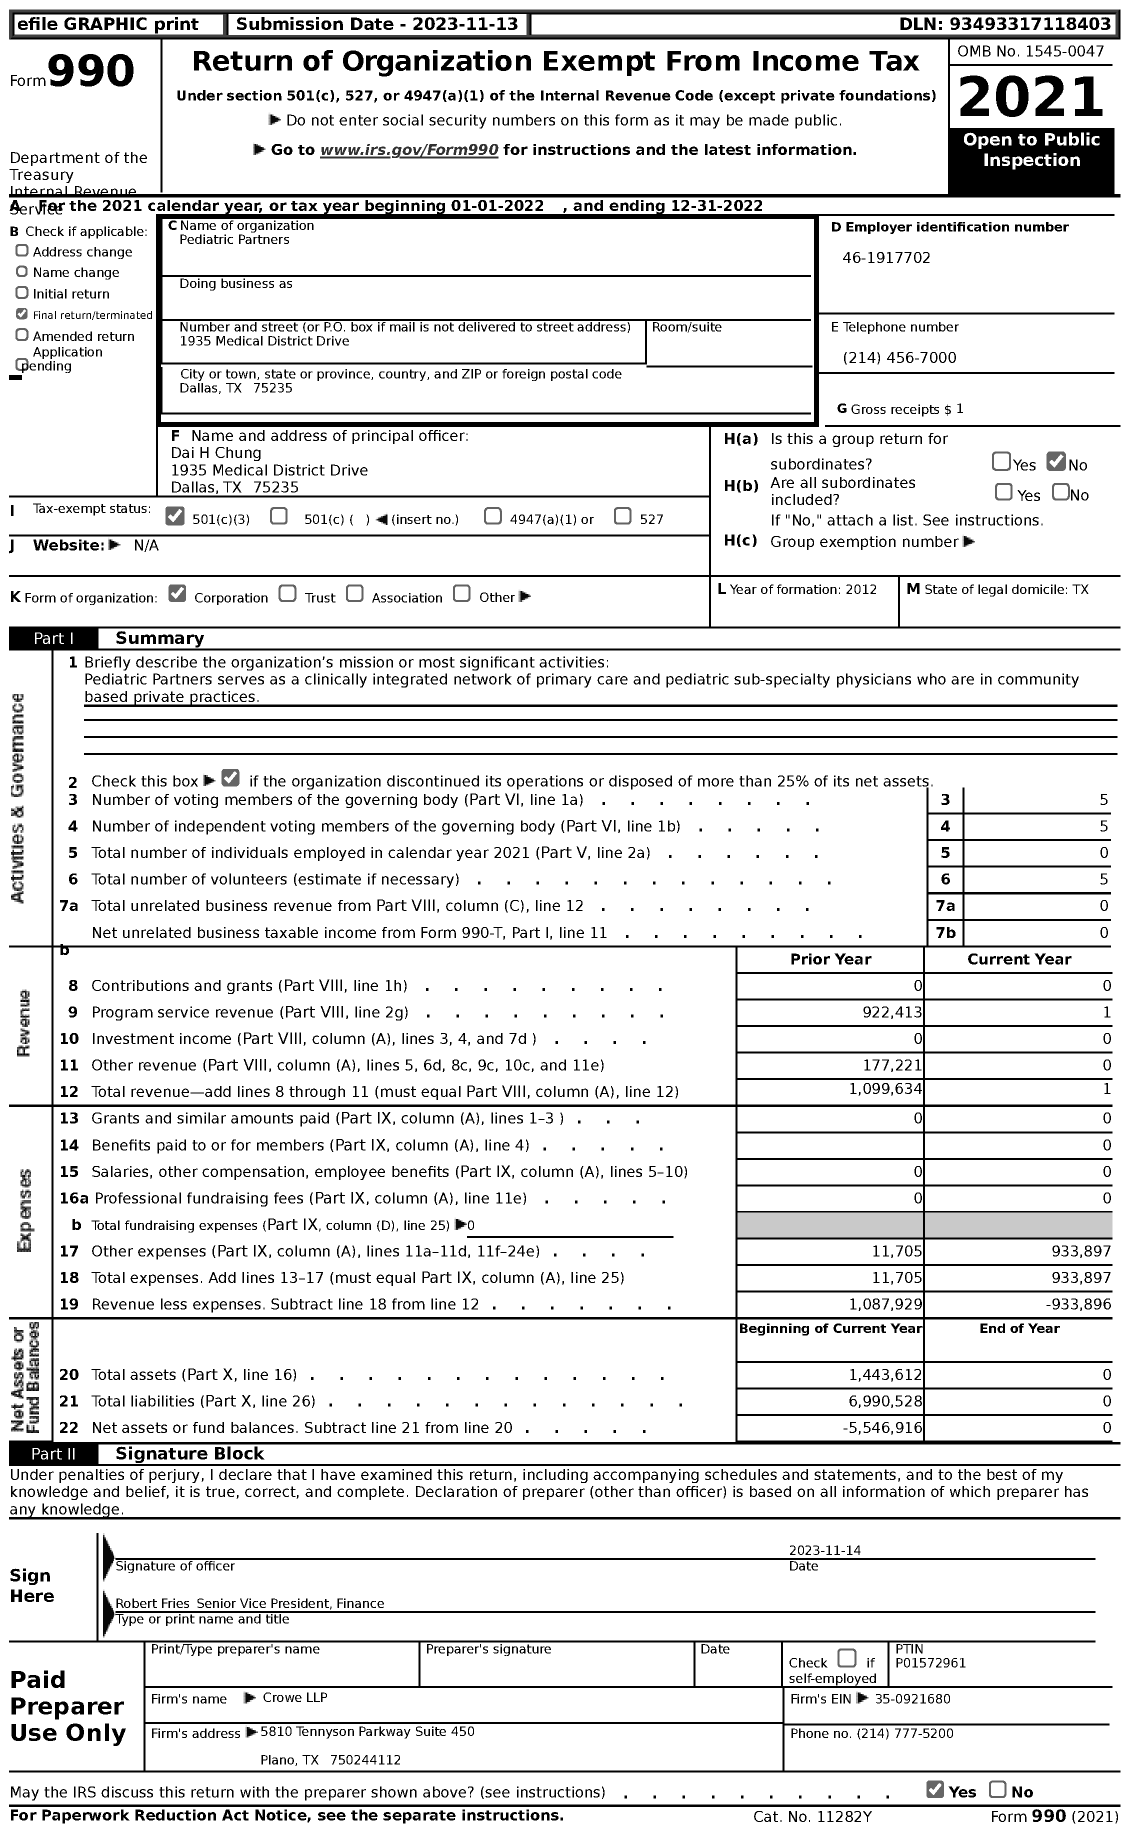 Image of first page of 2022 Form 990 for Pediatric Partners